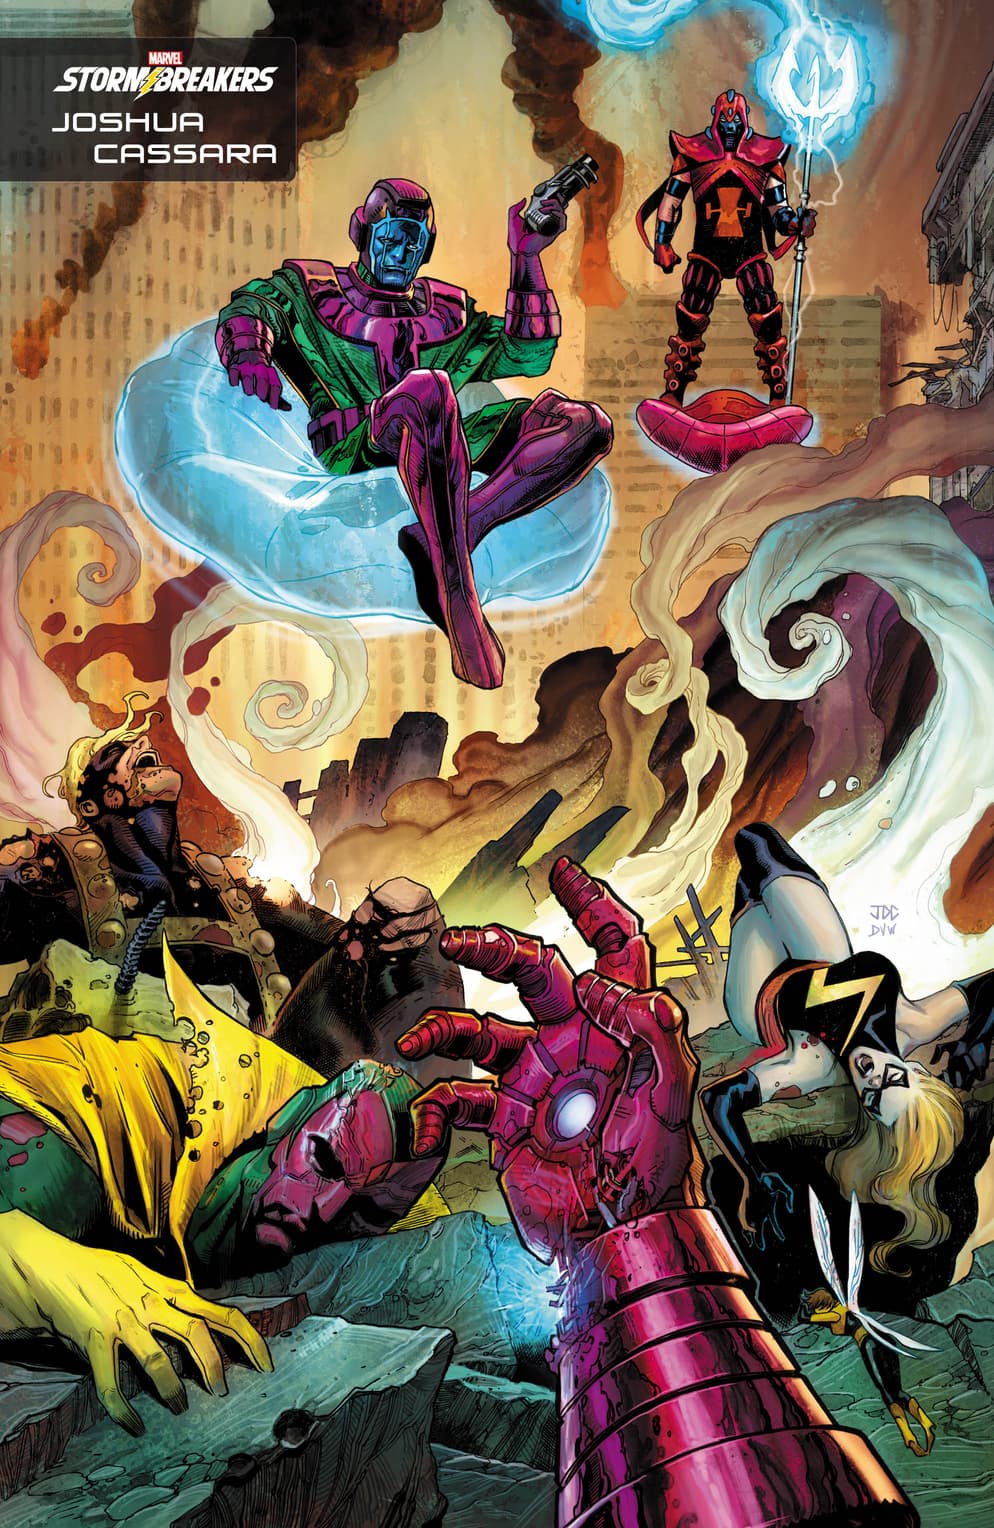 Kang the Conqueror #1 Stormbreakers Variant Cover by Joshua Cassara